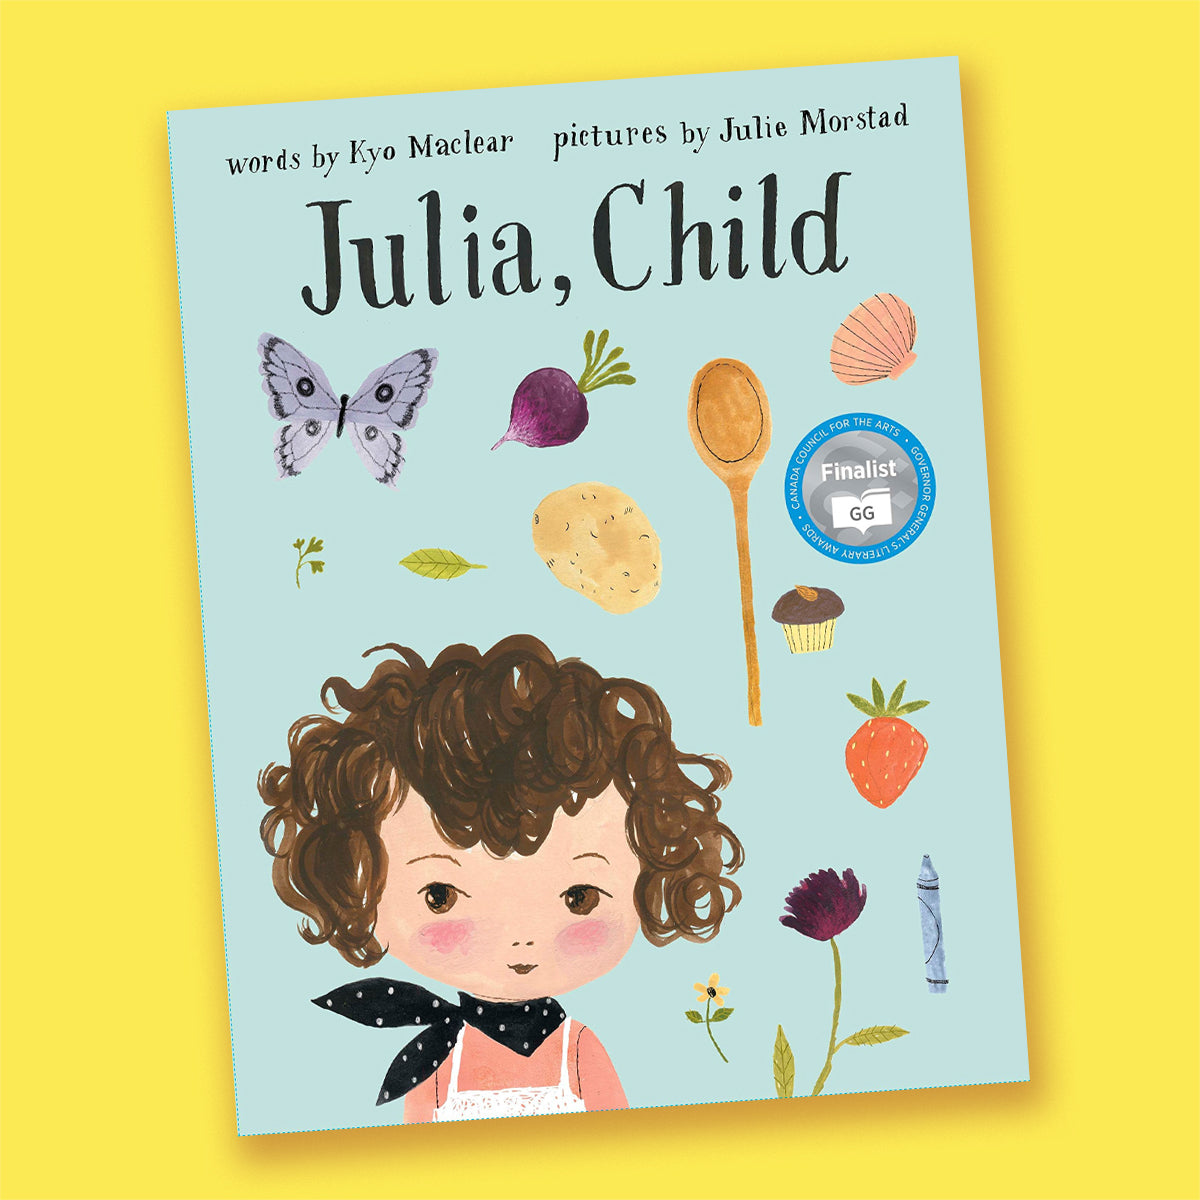 Julia, Child by Kyo Maclear and Julie Morstad